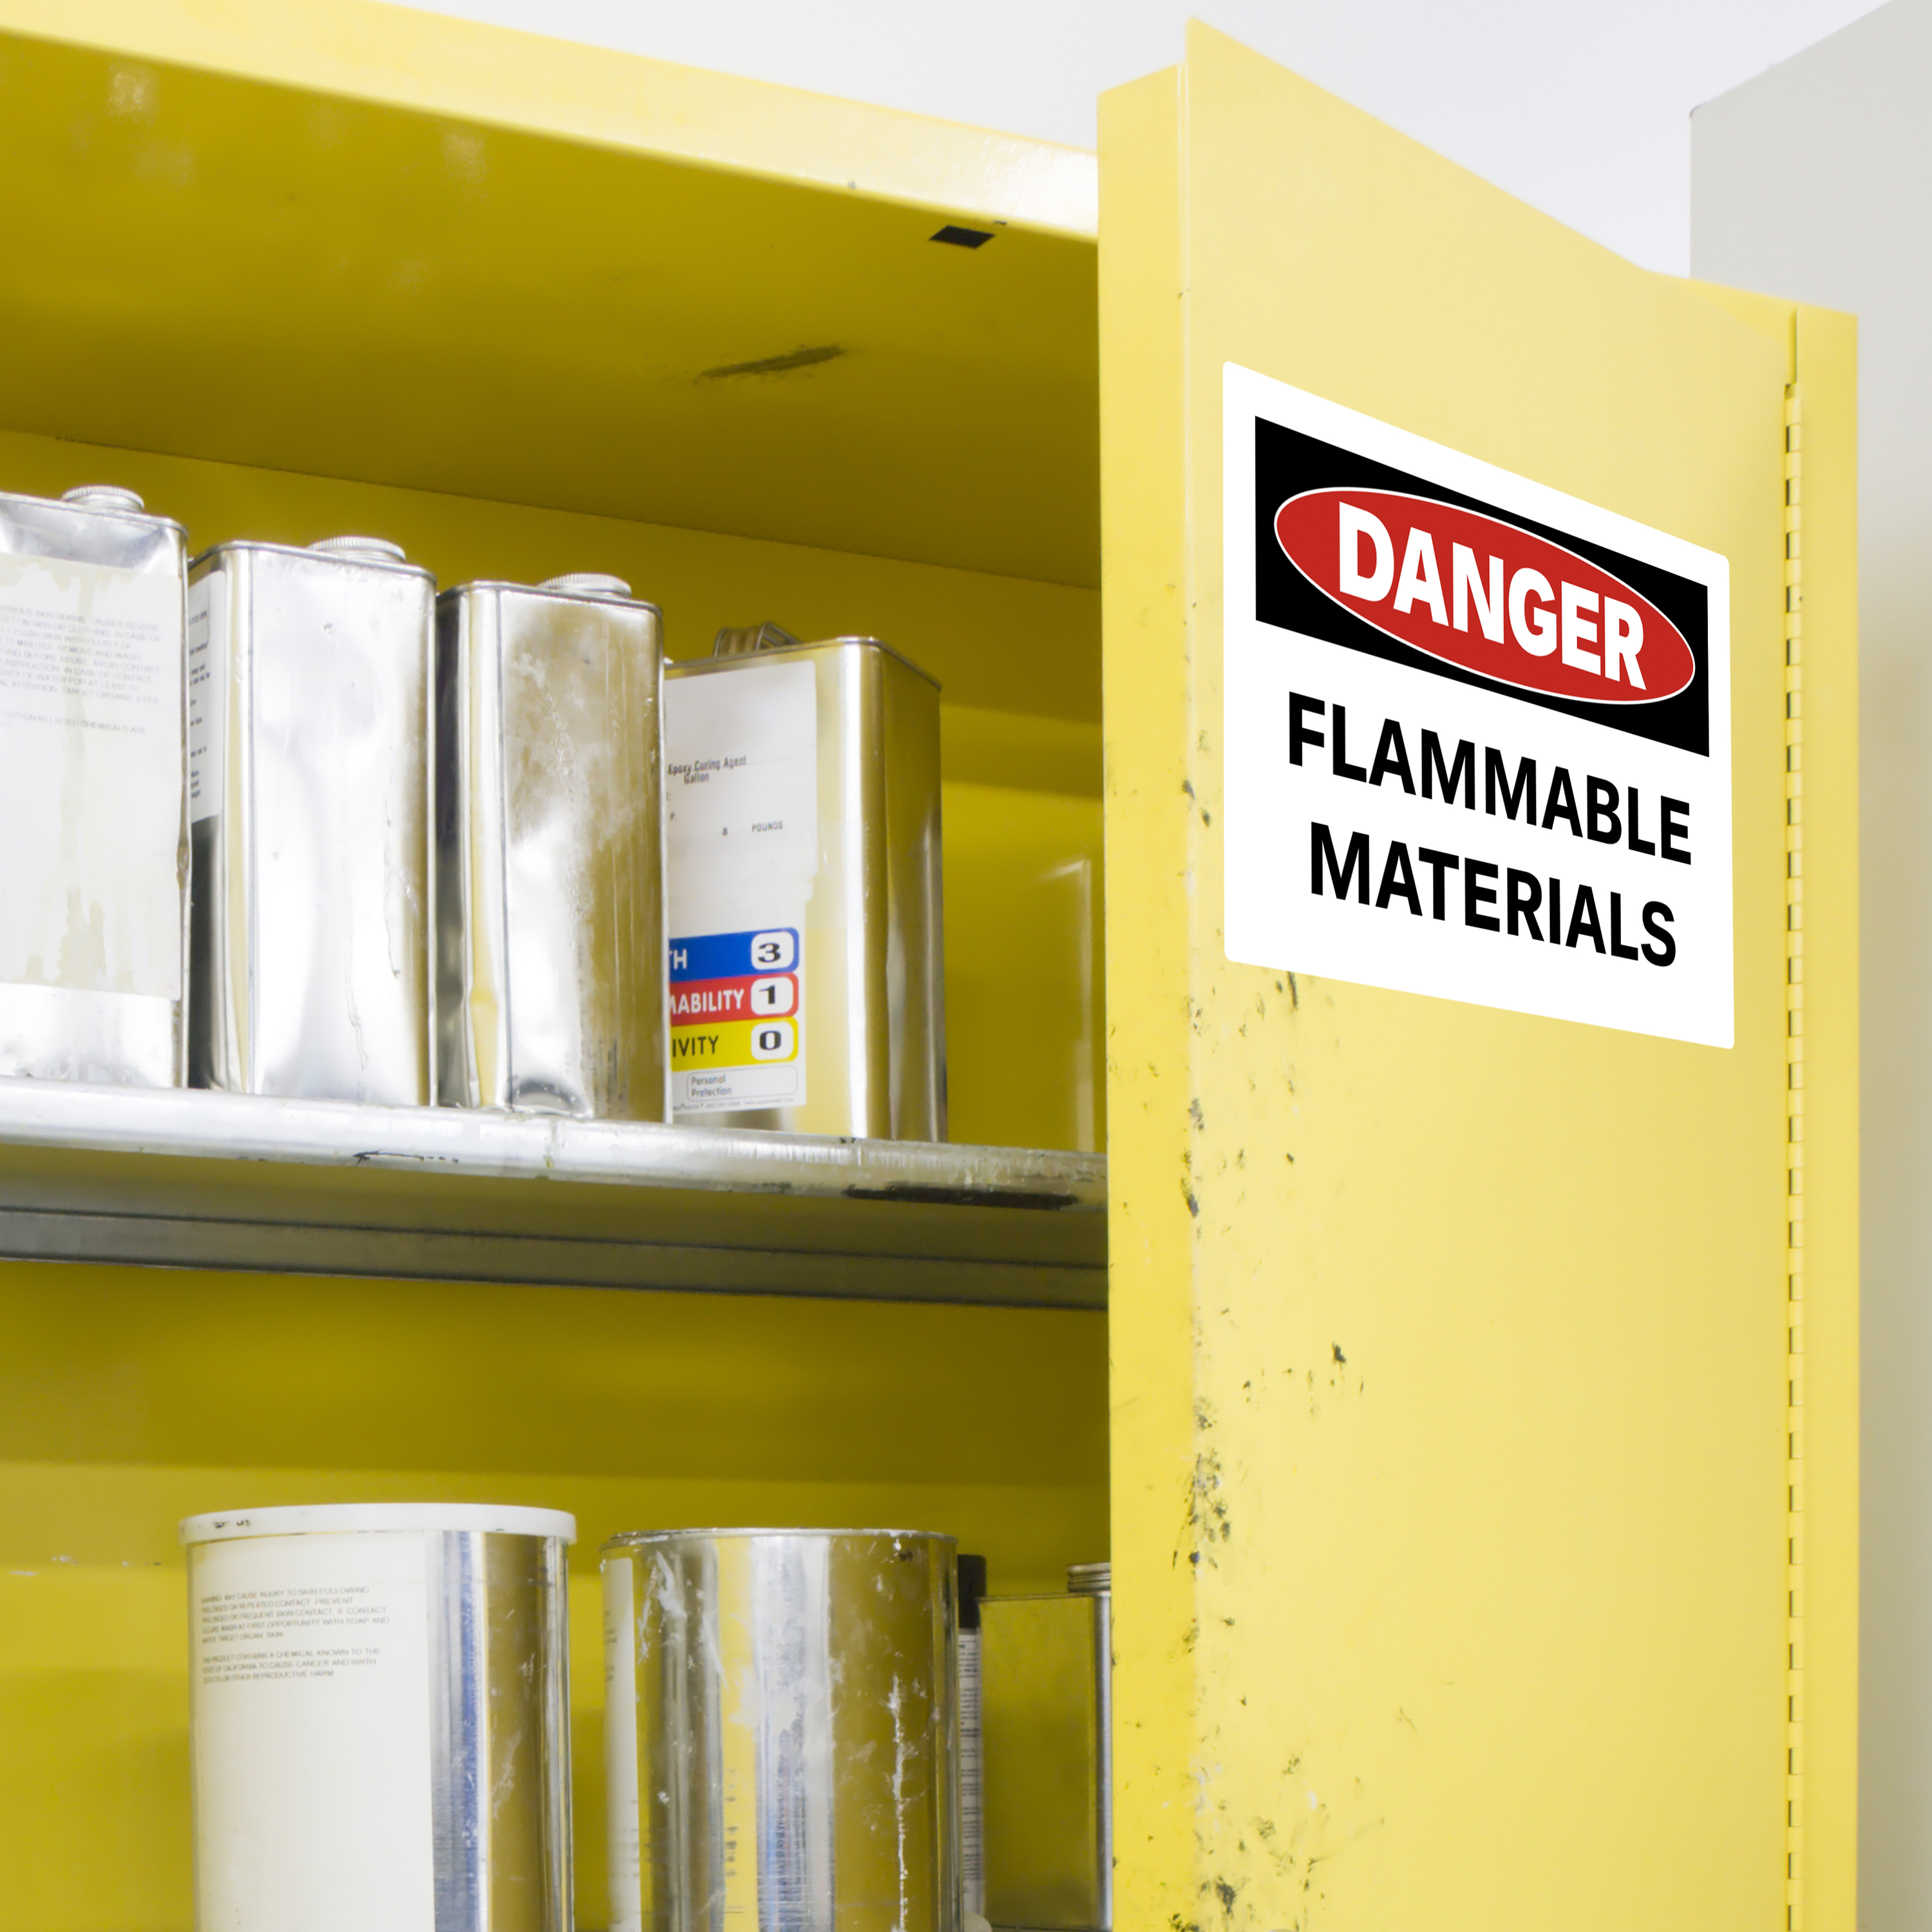 An example of a safety sign for flammable materials with a standard OSHA danger heading. It is applied on a metal cabinet filled with paint supplies and chemicals. The sign is printed on Avery 61552 vinyl sign labels.